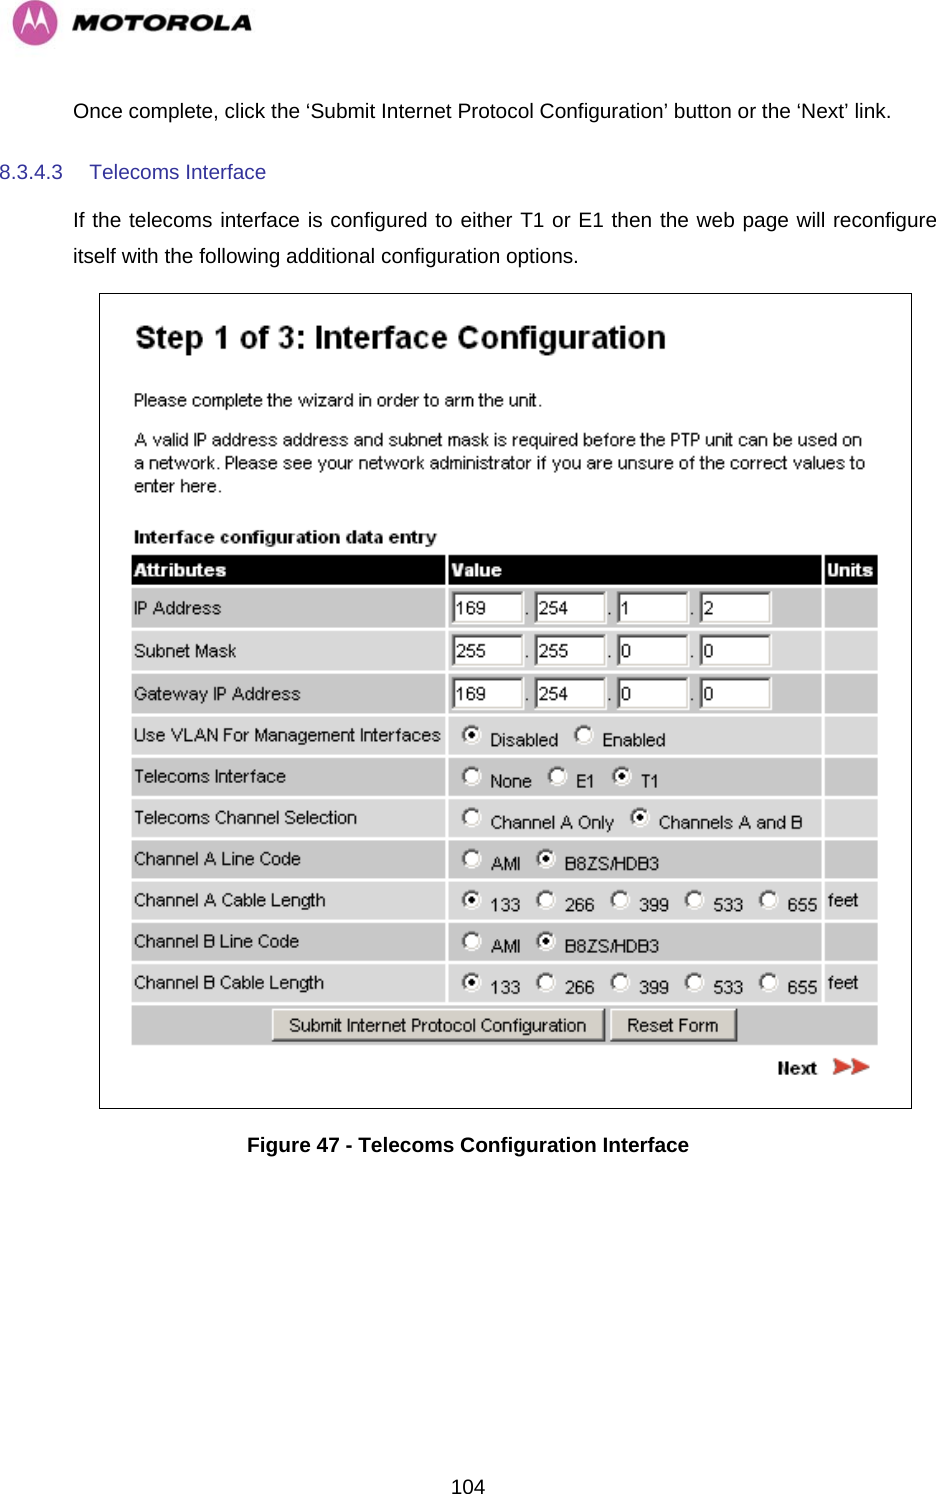   104Once complete, click the ‘Submit Internet Protocol Configuration’ button or the ‘Next’ link. 8.3.4.3 Telecoms Interface If the telecoms interface is configured to either T1 or E1 then the web page will reconfigure itself with the following additional configuration options.  Figure 47 - Telecoms Configuration Interface 